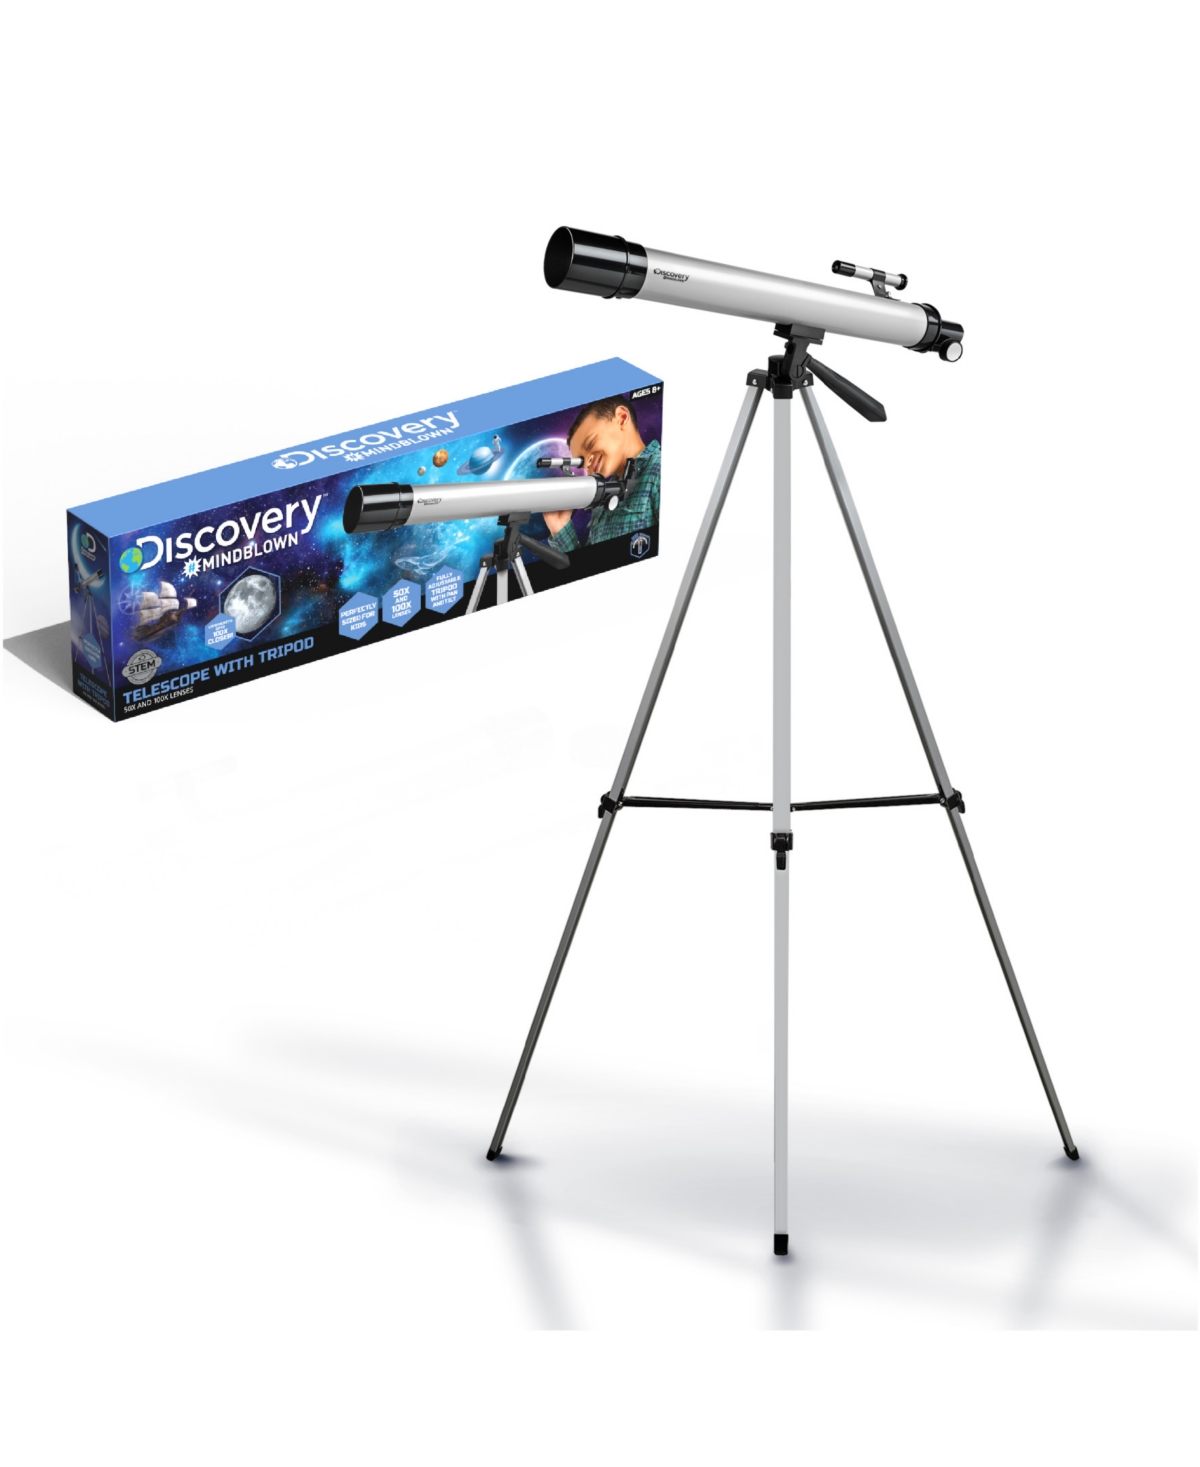 Discovery Mindblown Telescope With Tripod